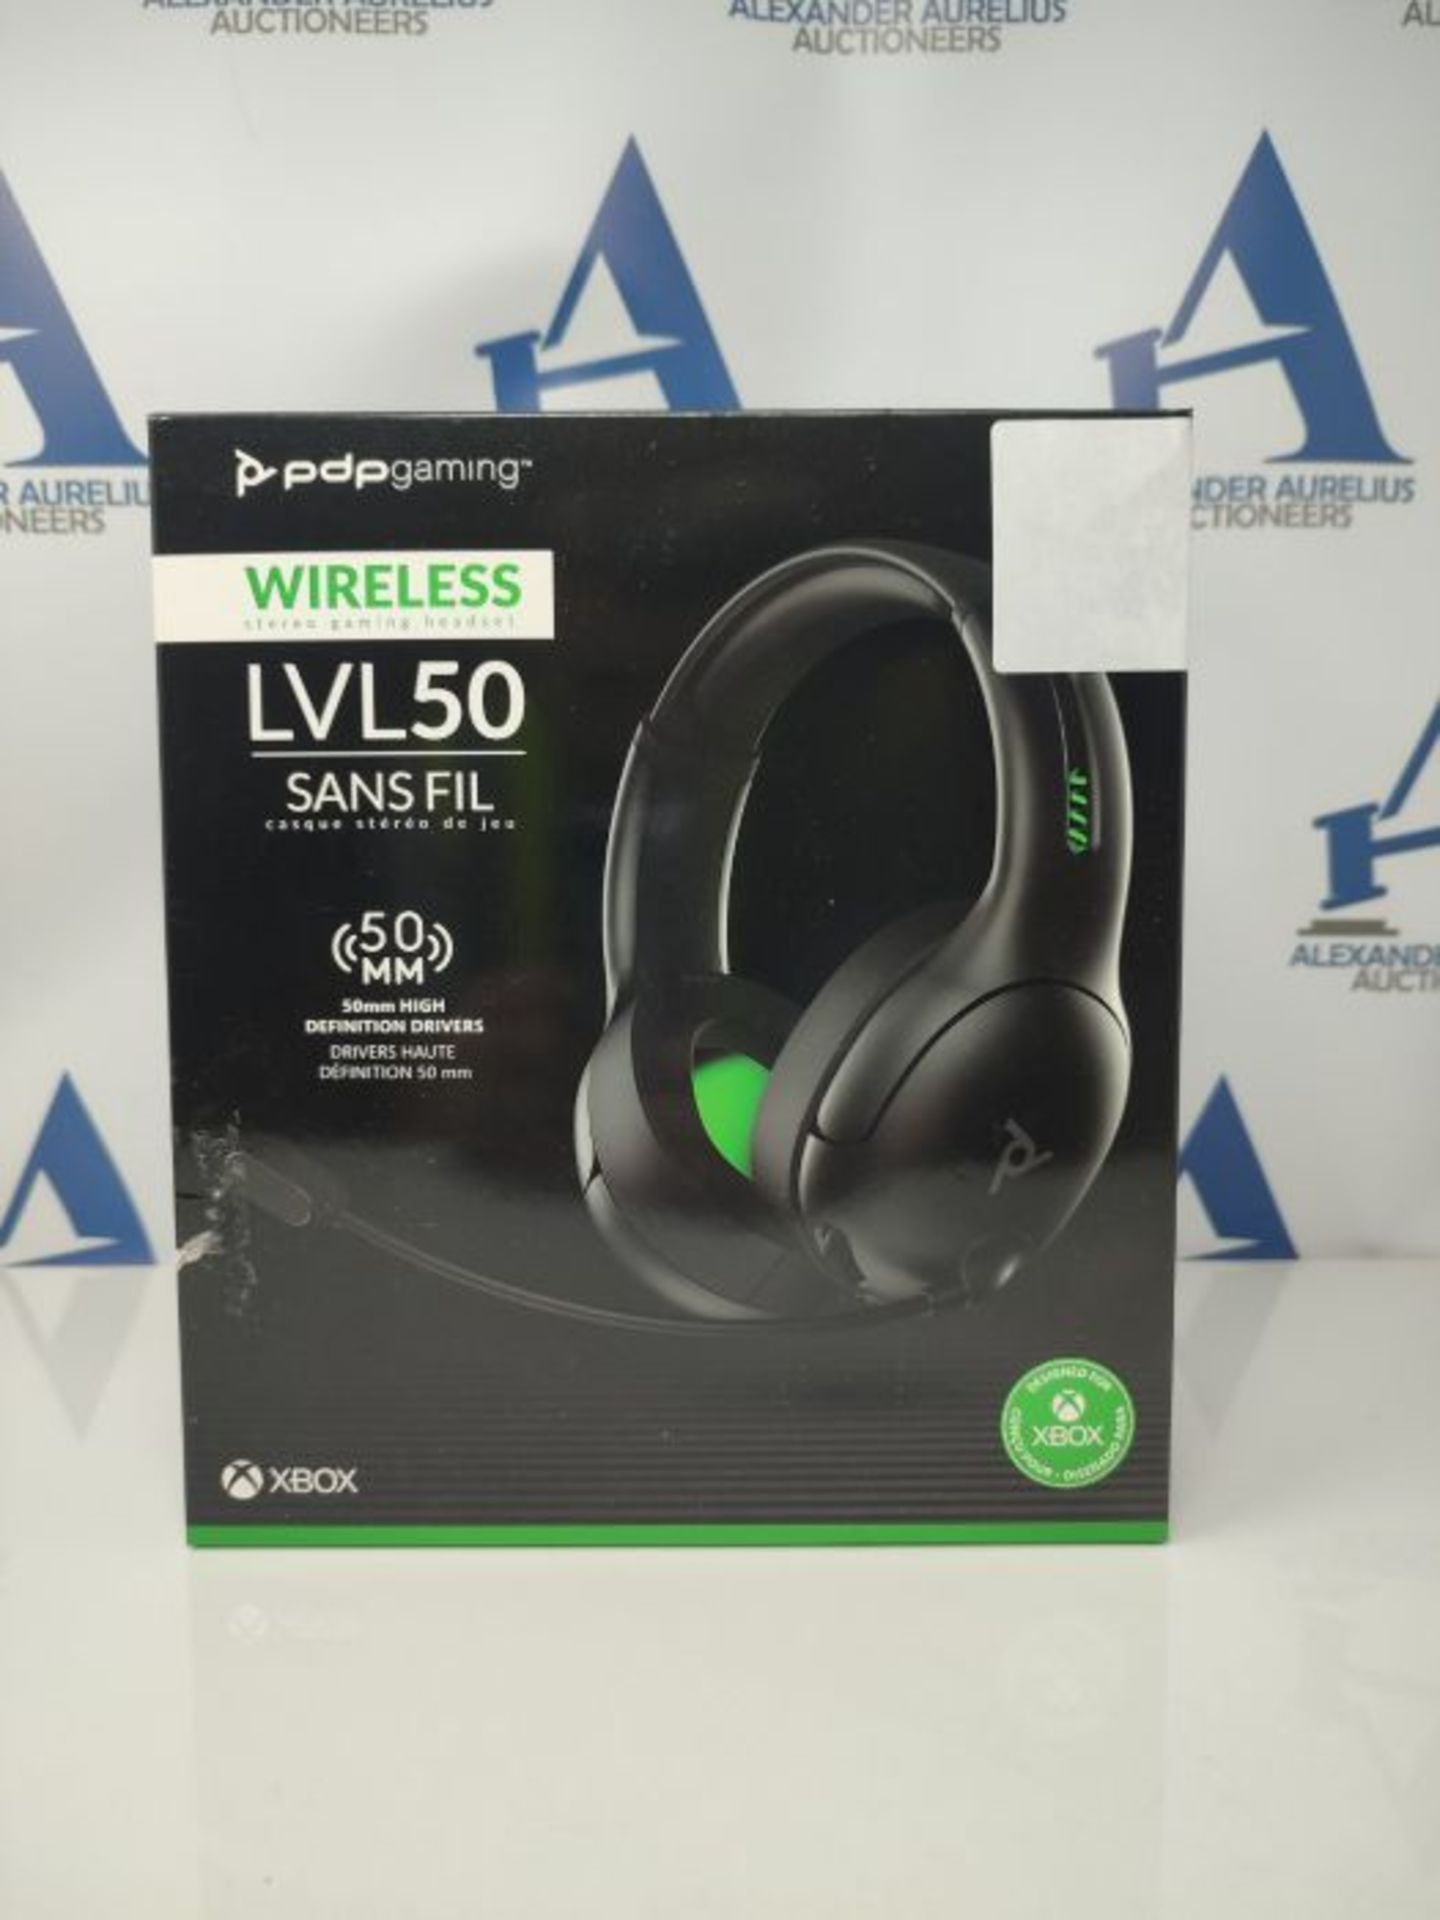 RRP £62.00 PDP Gaming LVL50 Wireless Headset with Mic for Xbox One, Series X|S - PC, Laptop Compa - Image 2 of 3